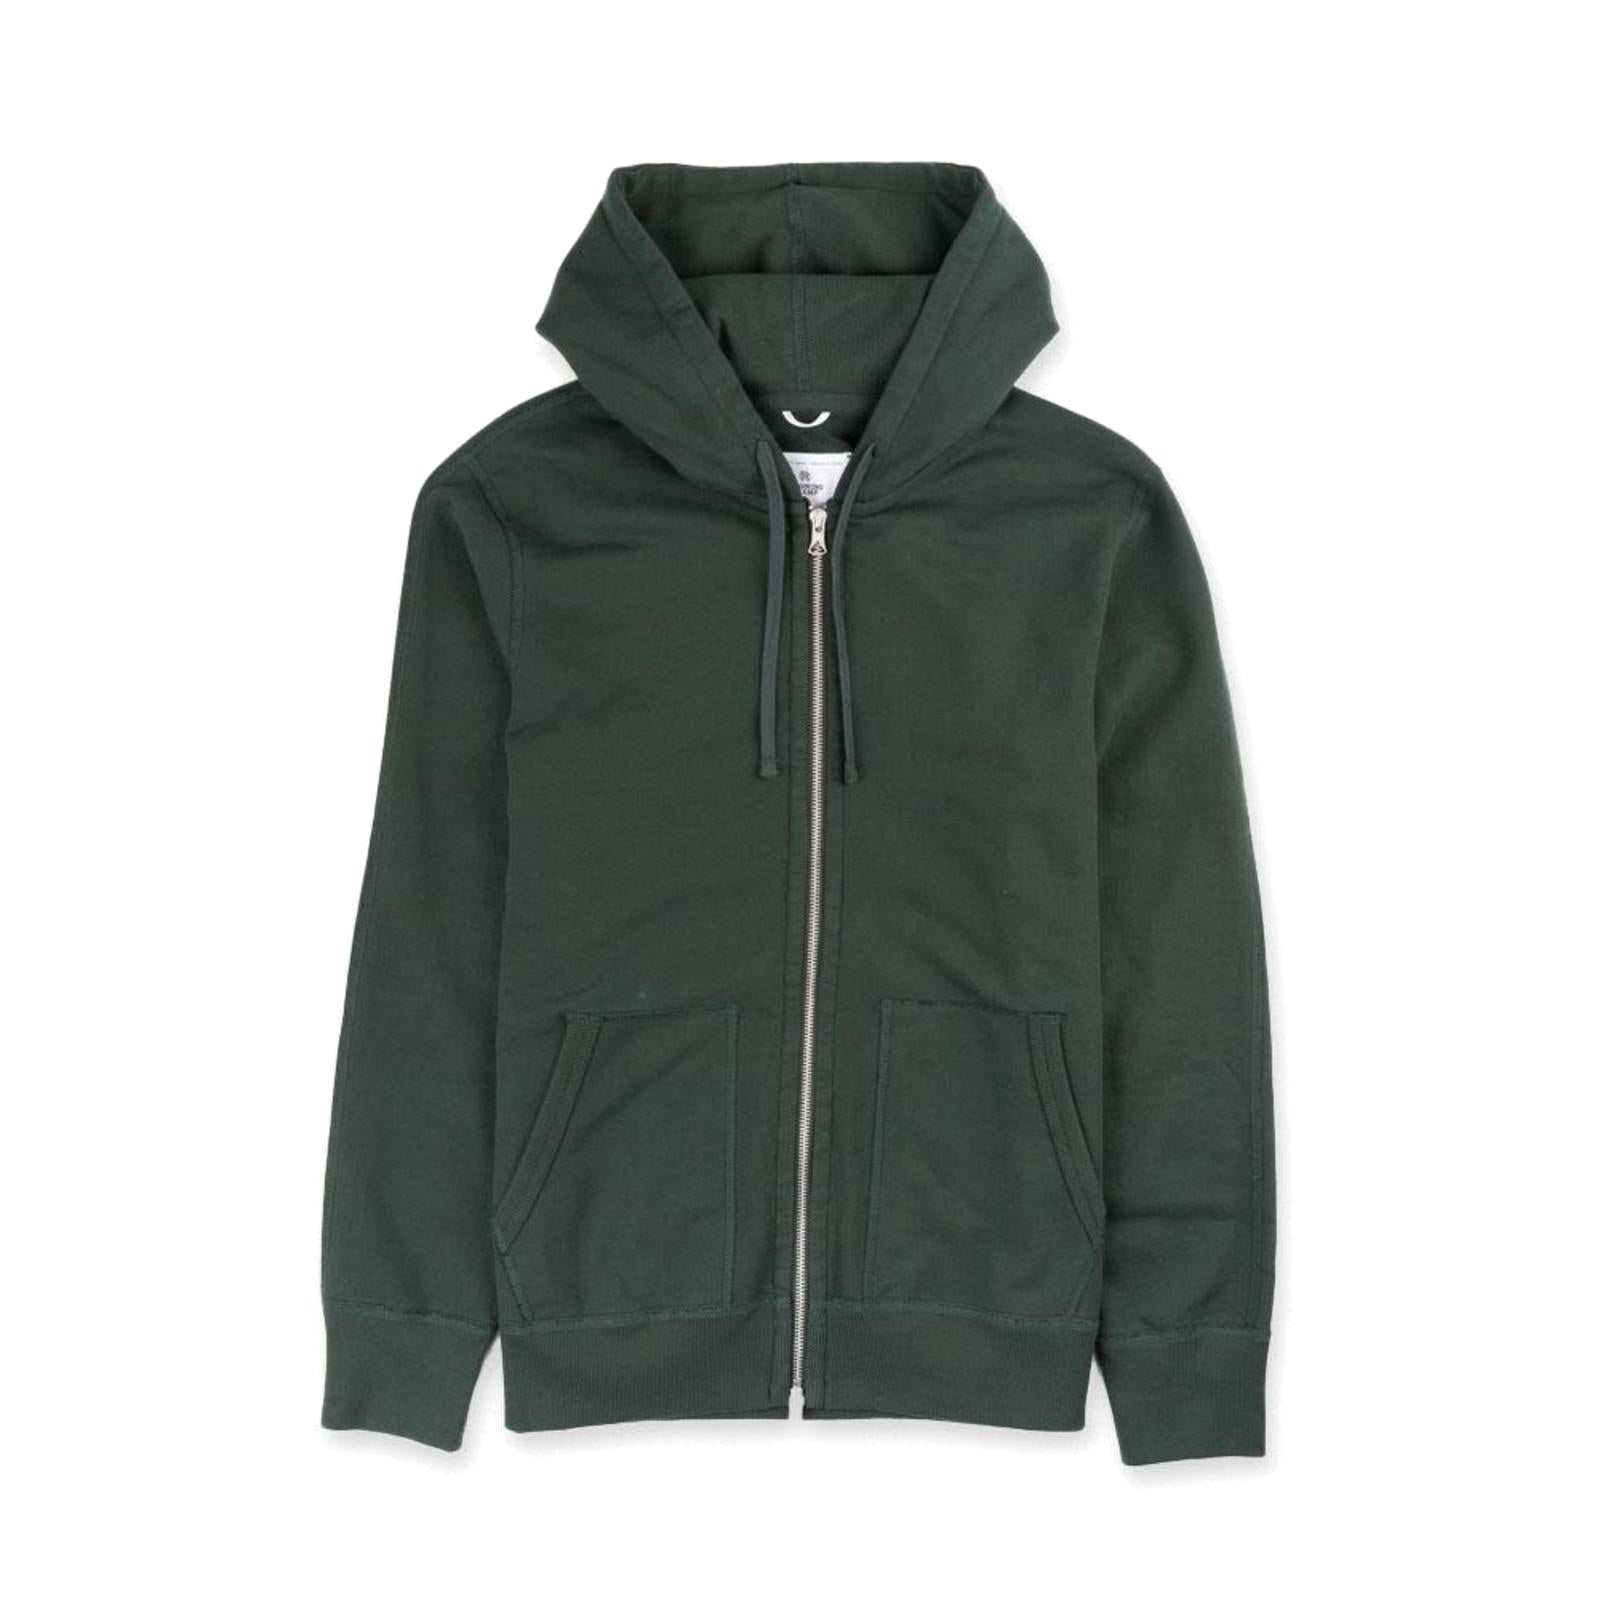 Reigning Champ - Full Zip Hoodie - Forest Green